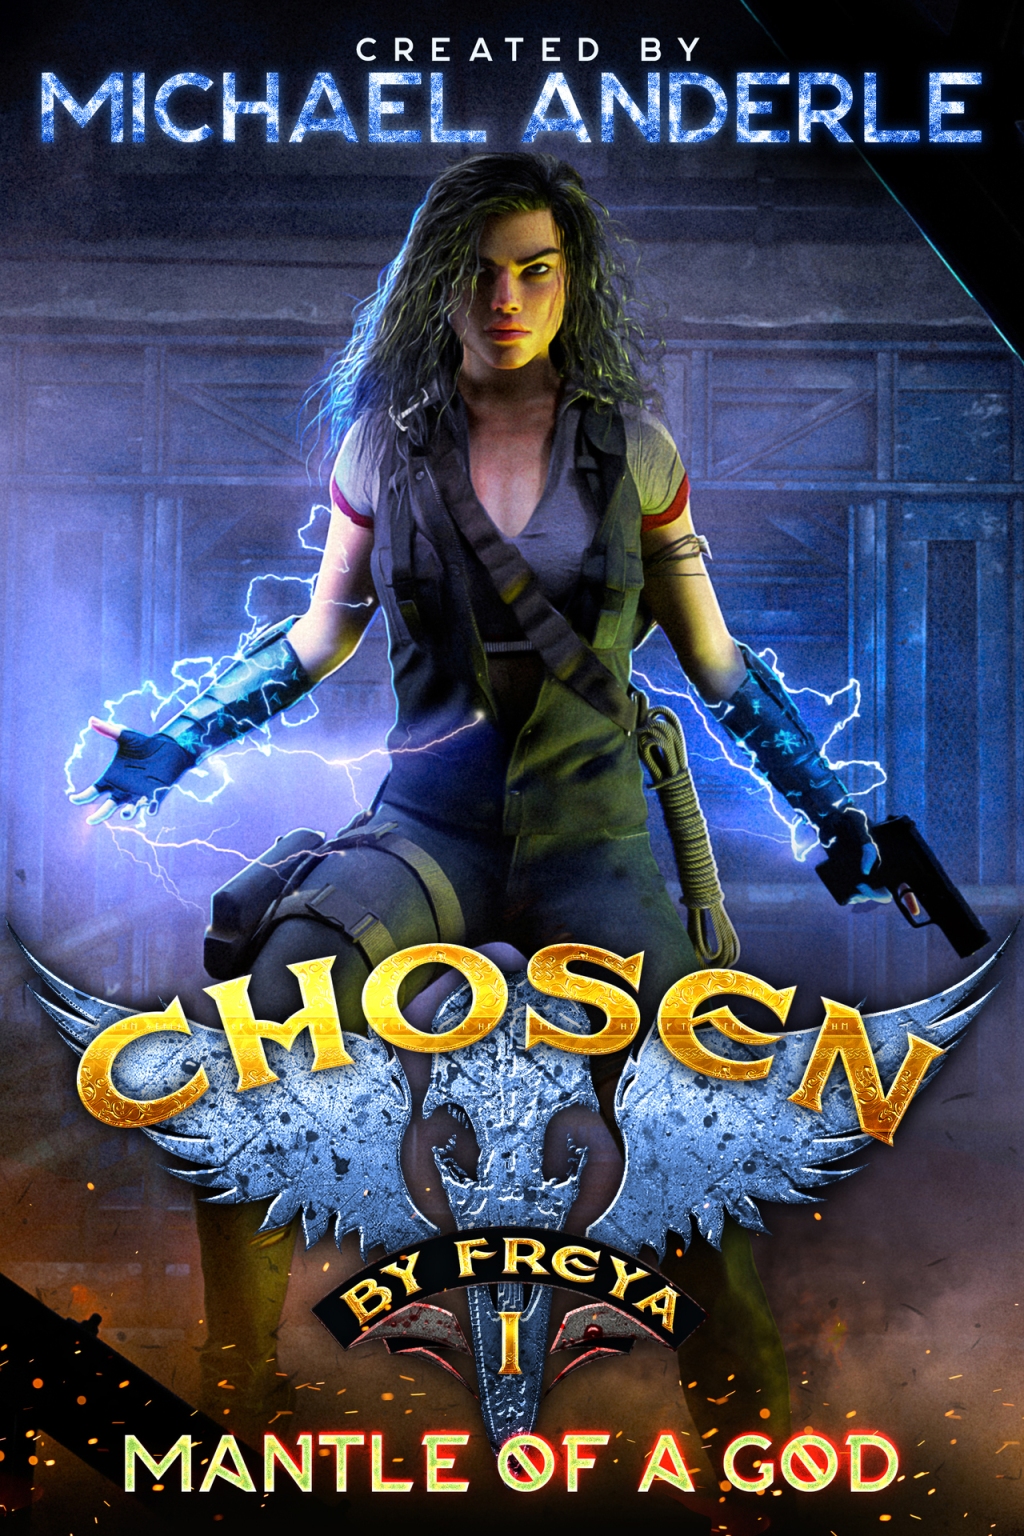 Chosen By Freya books 1 to 3 – Not bad but not wow great either.